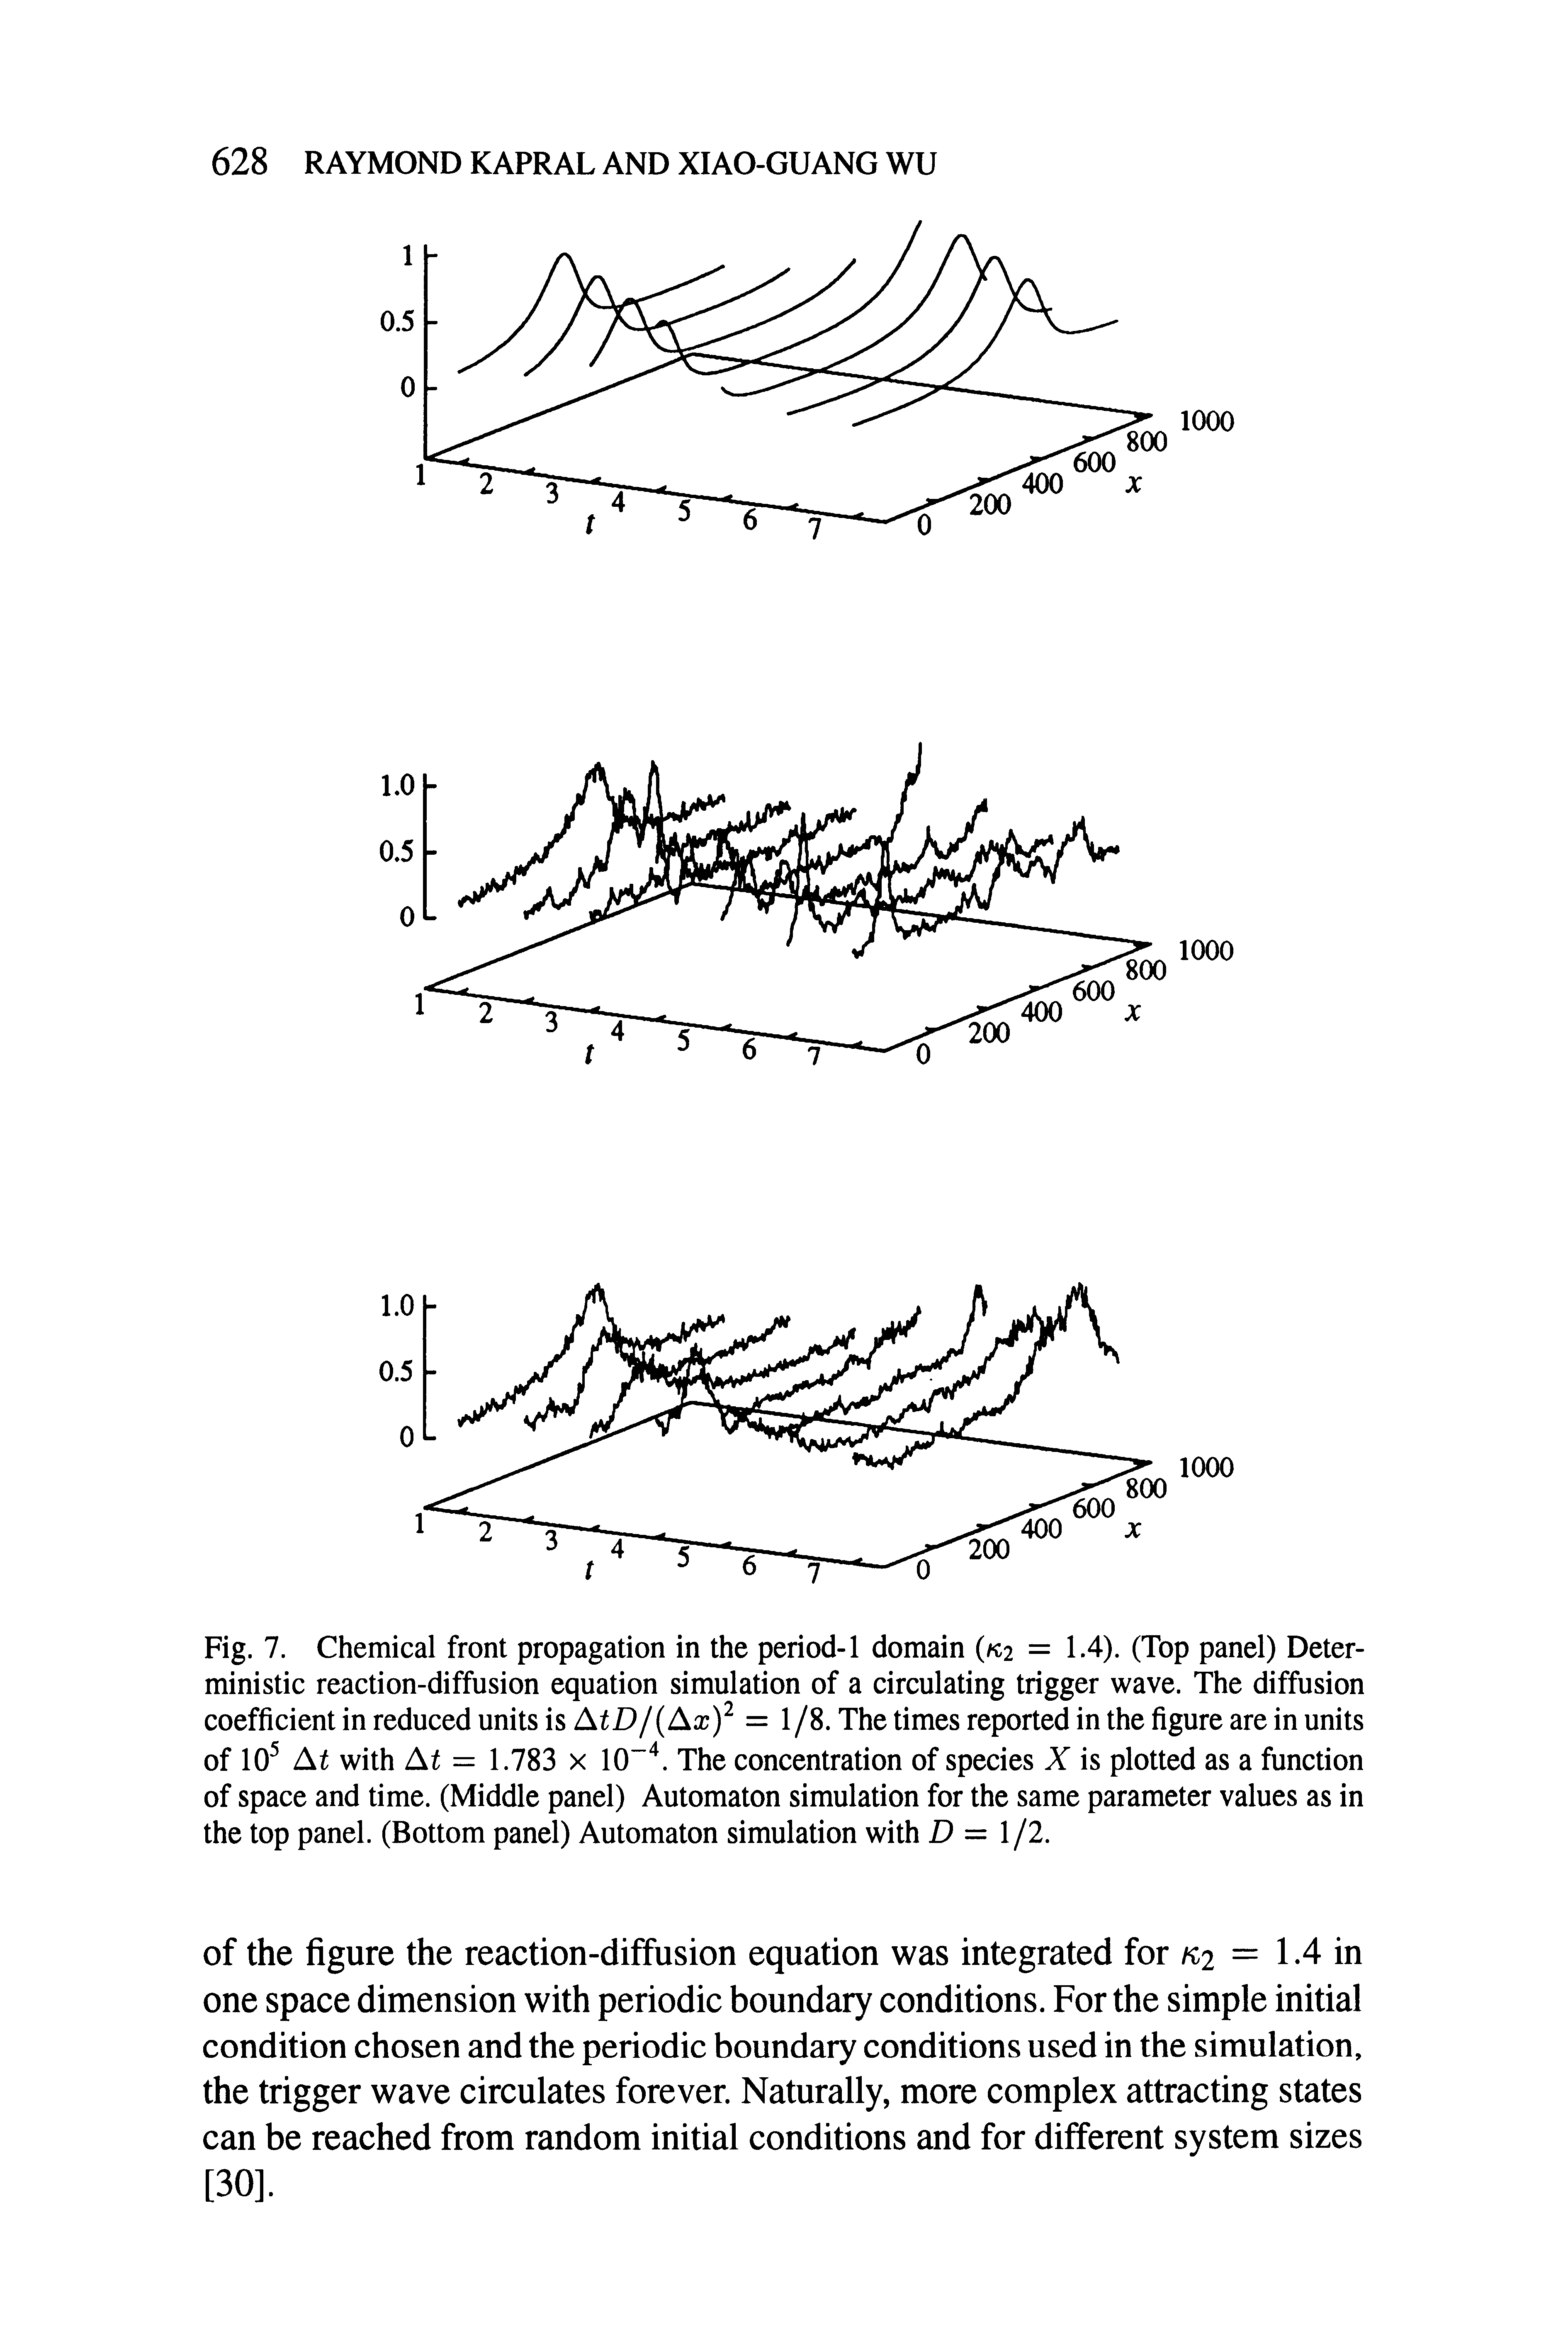 Fig. 7. Chemical front propagation in the period-1 domain ( 2 = 1.4). (Top panel) Deterministic reaction-diffusion equation simulation of a circulating trigger wave. The diffusion coefficient in reduced units is AtD/ Ax) = 1 /8. The times reported in the figure are in units of 10 At with At = 1.783 x 10 . The concentration of species X is plotted as a function of space and time. (Middle panel) Automaton simulation for the same parameter values as in the top panel. (Bottom panel) Automaton simulation with D = /2.